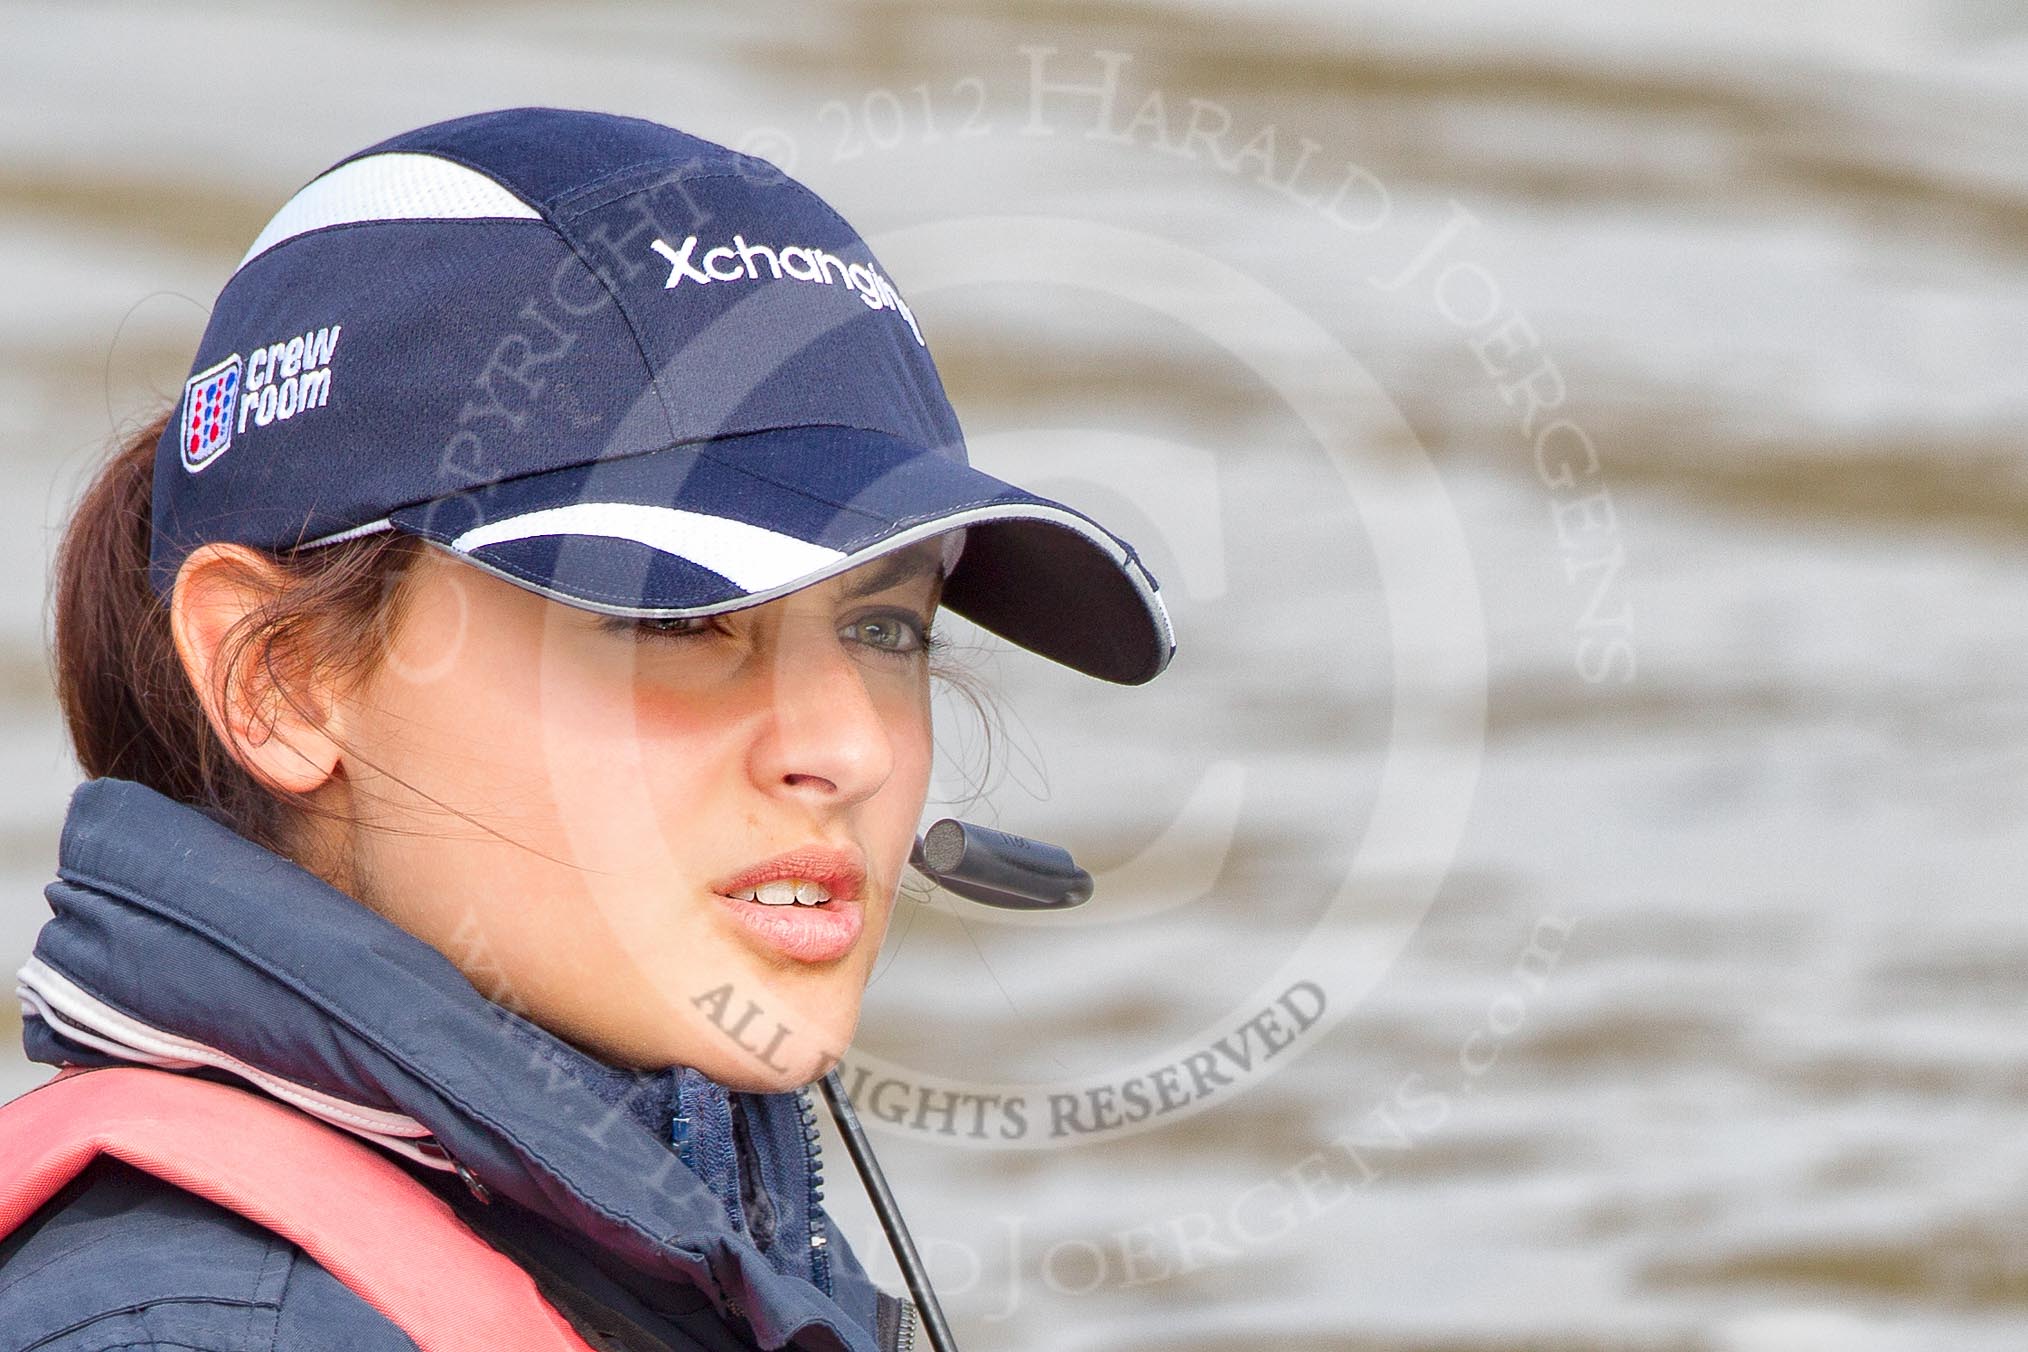 The Boat Race season 2012 - fixture CUBC vs Leander: Close-up of OUBC cox Zoe de Toledo..
River Thames between Putney and Molesey,
London,
Greater London,
United Kingdom,
on 10 March 2012 at 13:03, image #5